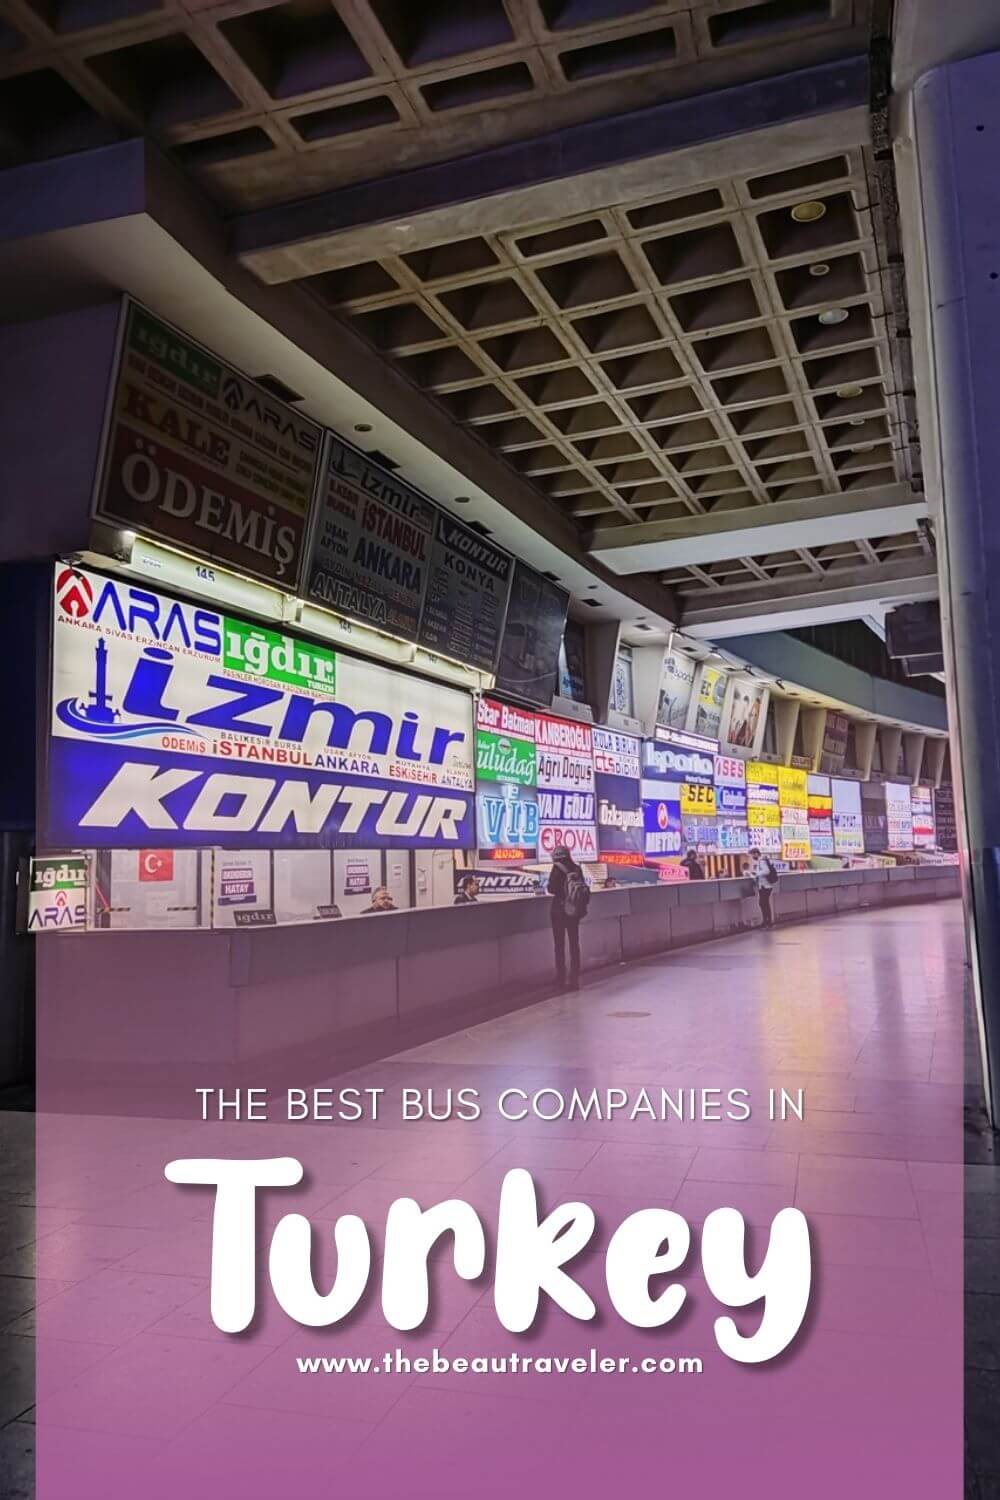 Review: The Best Bus Companies in Turkey - The BeauTraveler